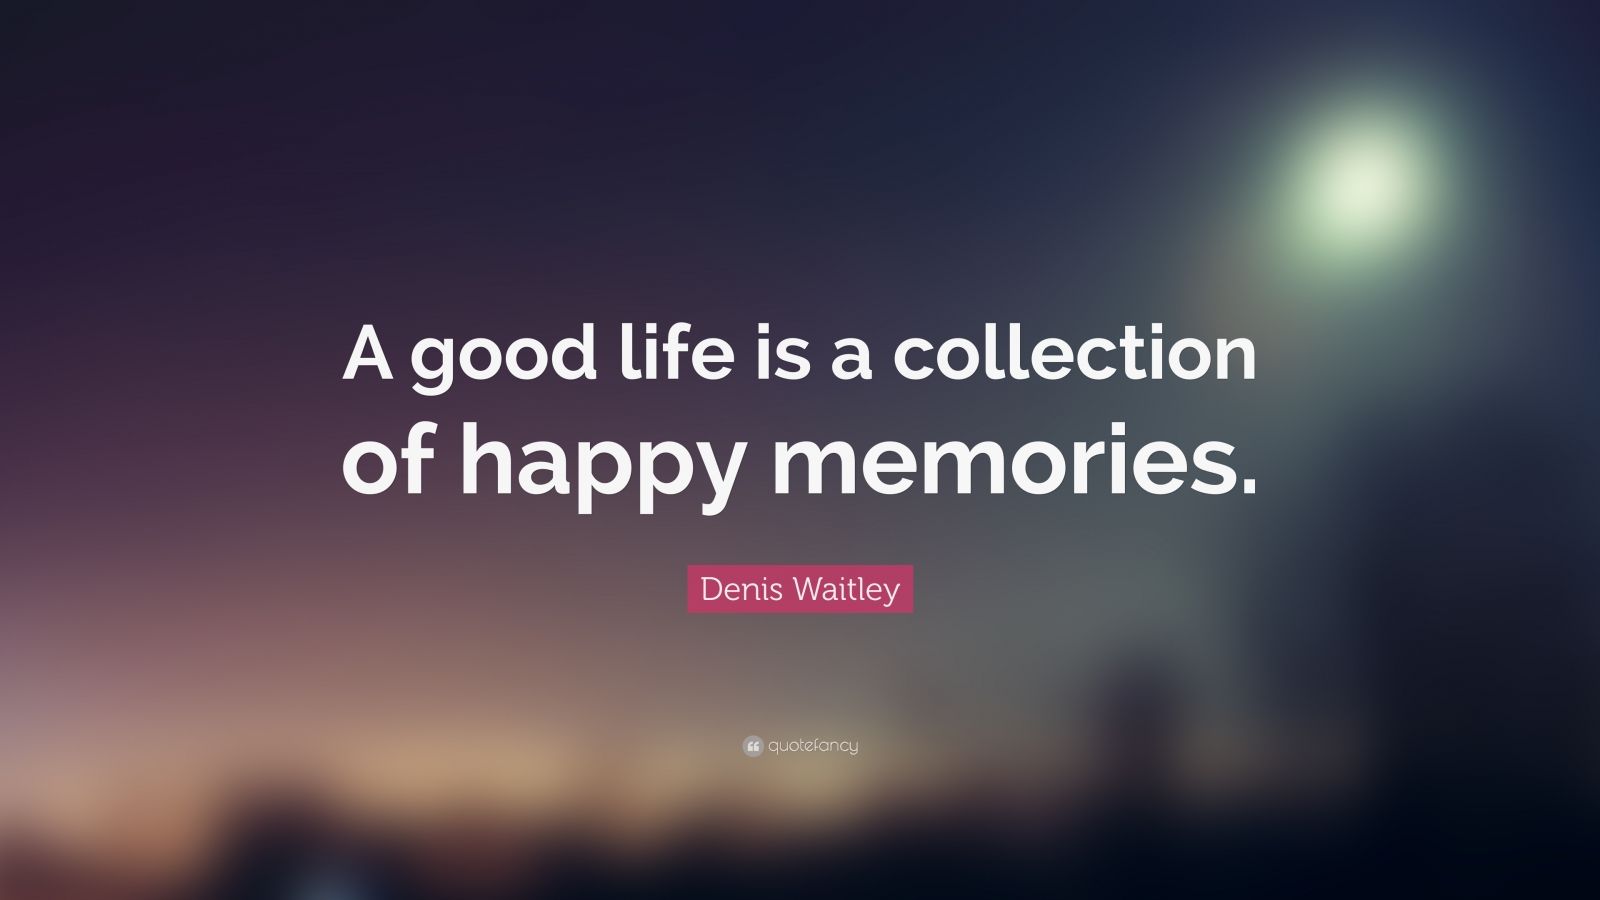 Denis Waitley Quote: “A good life is a collection of happy memories ...